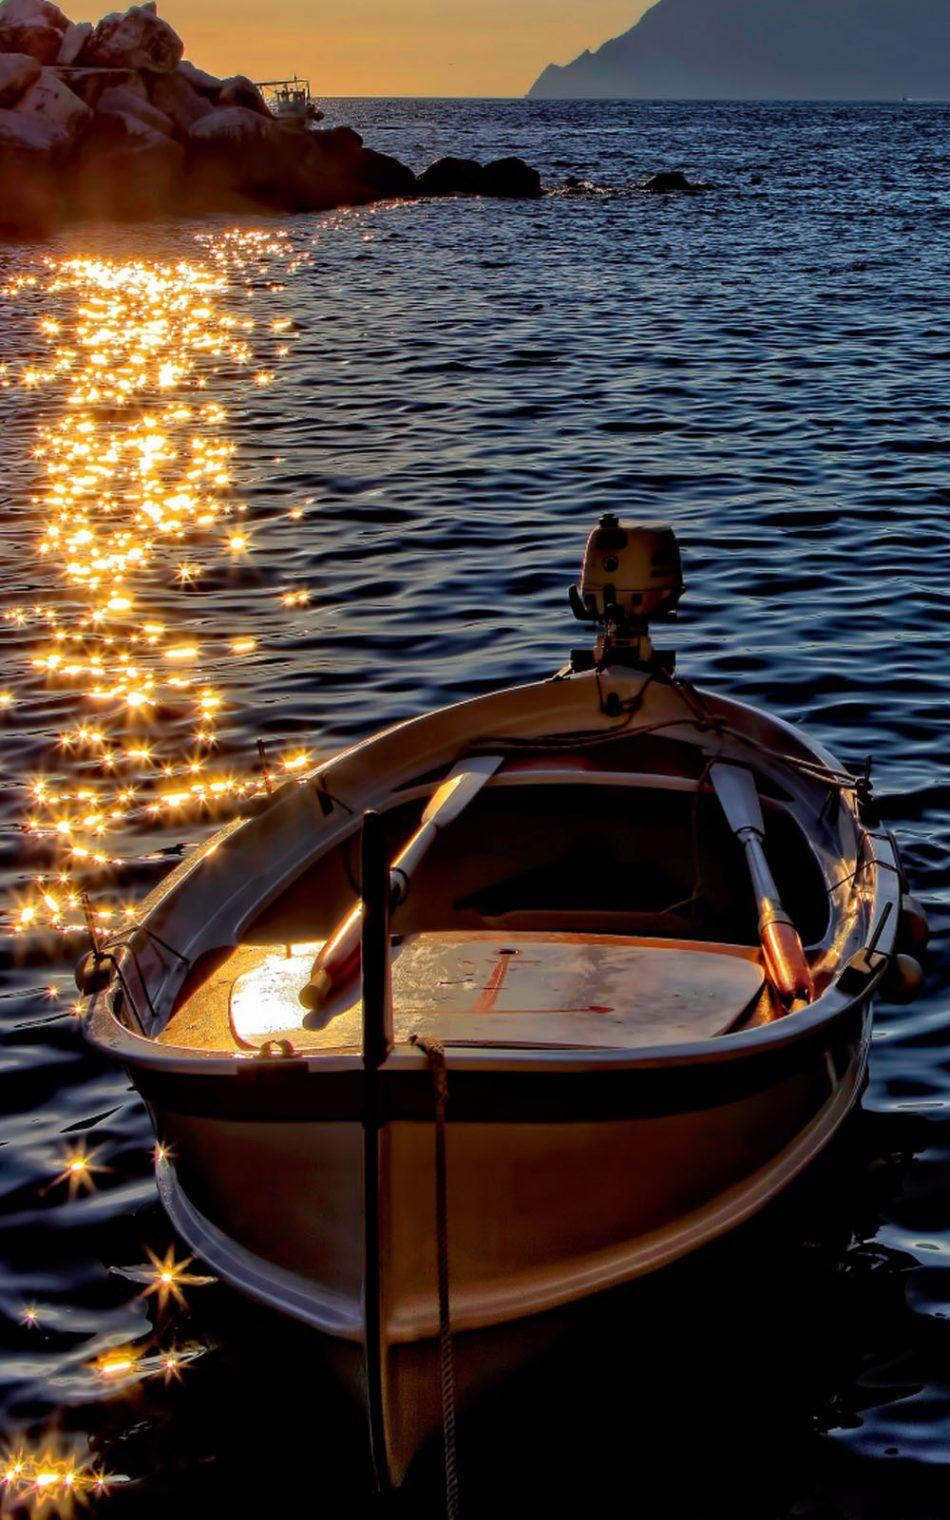 Sunset Boat On Sea Free 100% Pure HD Quality Mobile Wallpaper